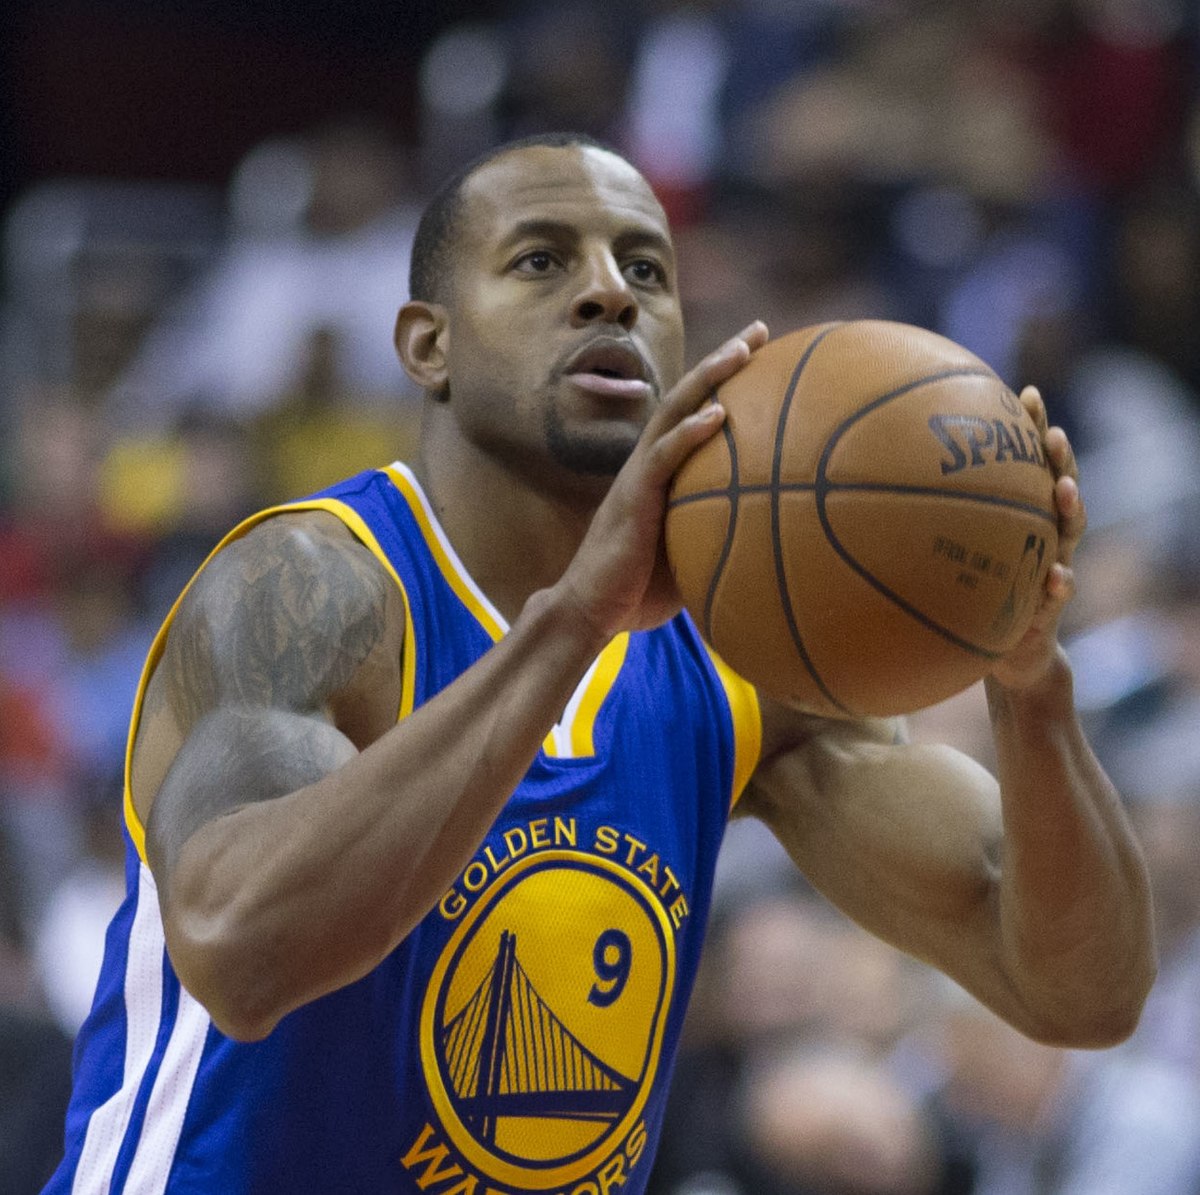 TechCabal Daily, 851 - NBA Superstar Investor, Andre Iguodala, is coming to Nigeria